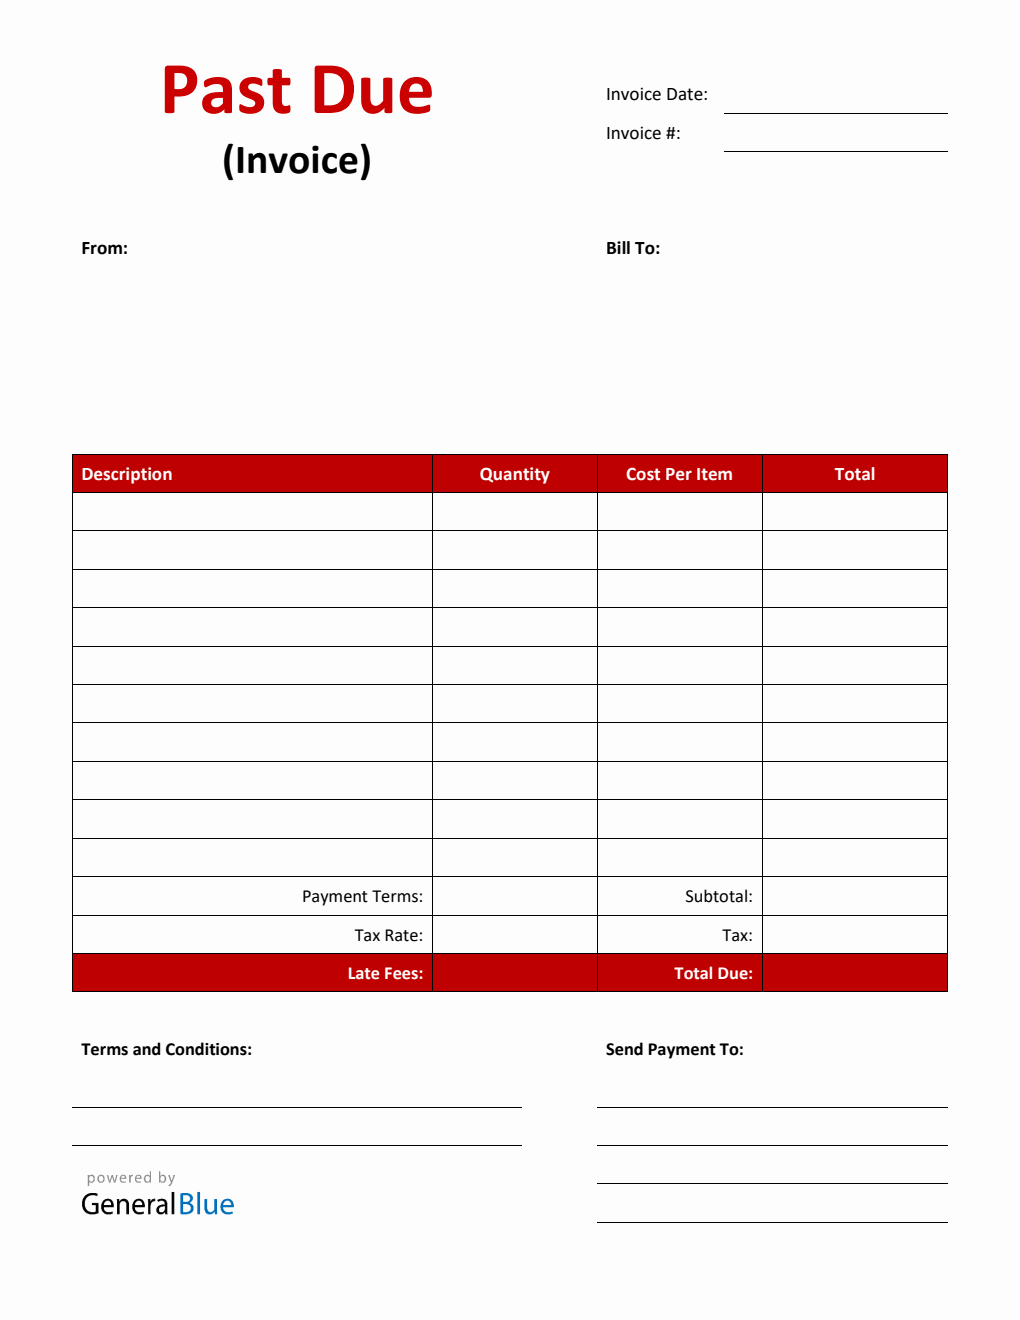 Past Due Invoice in Word (Basic)